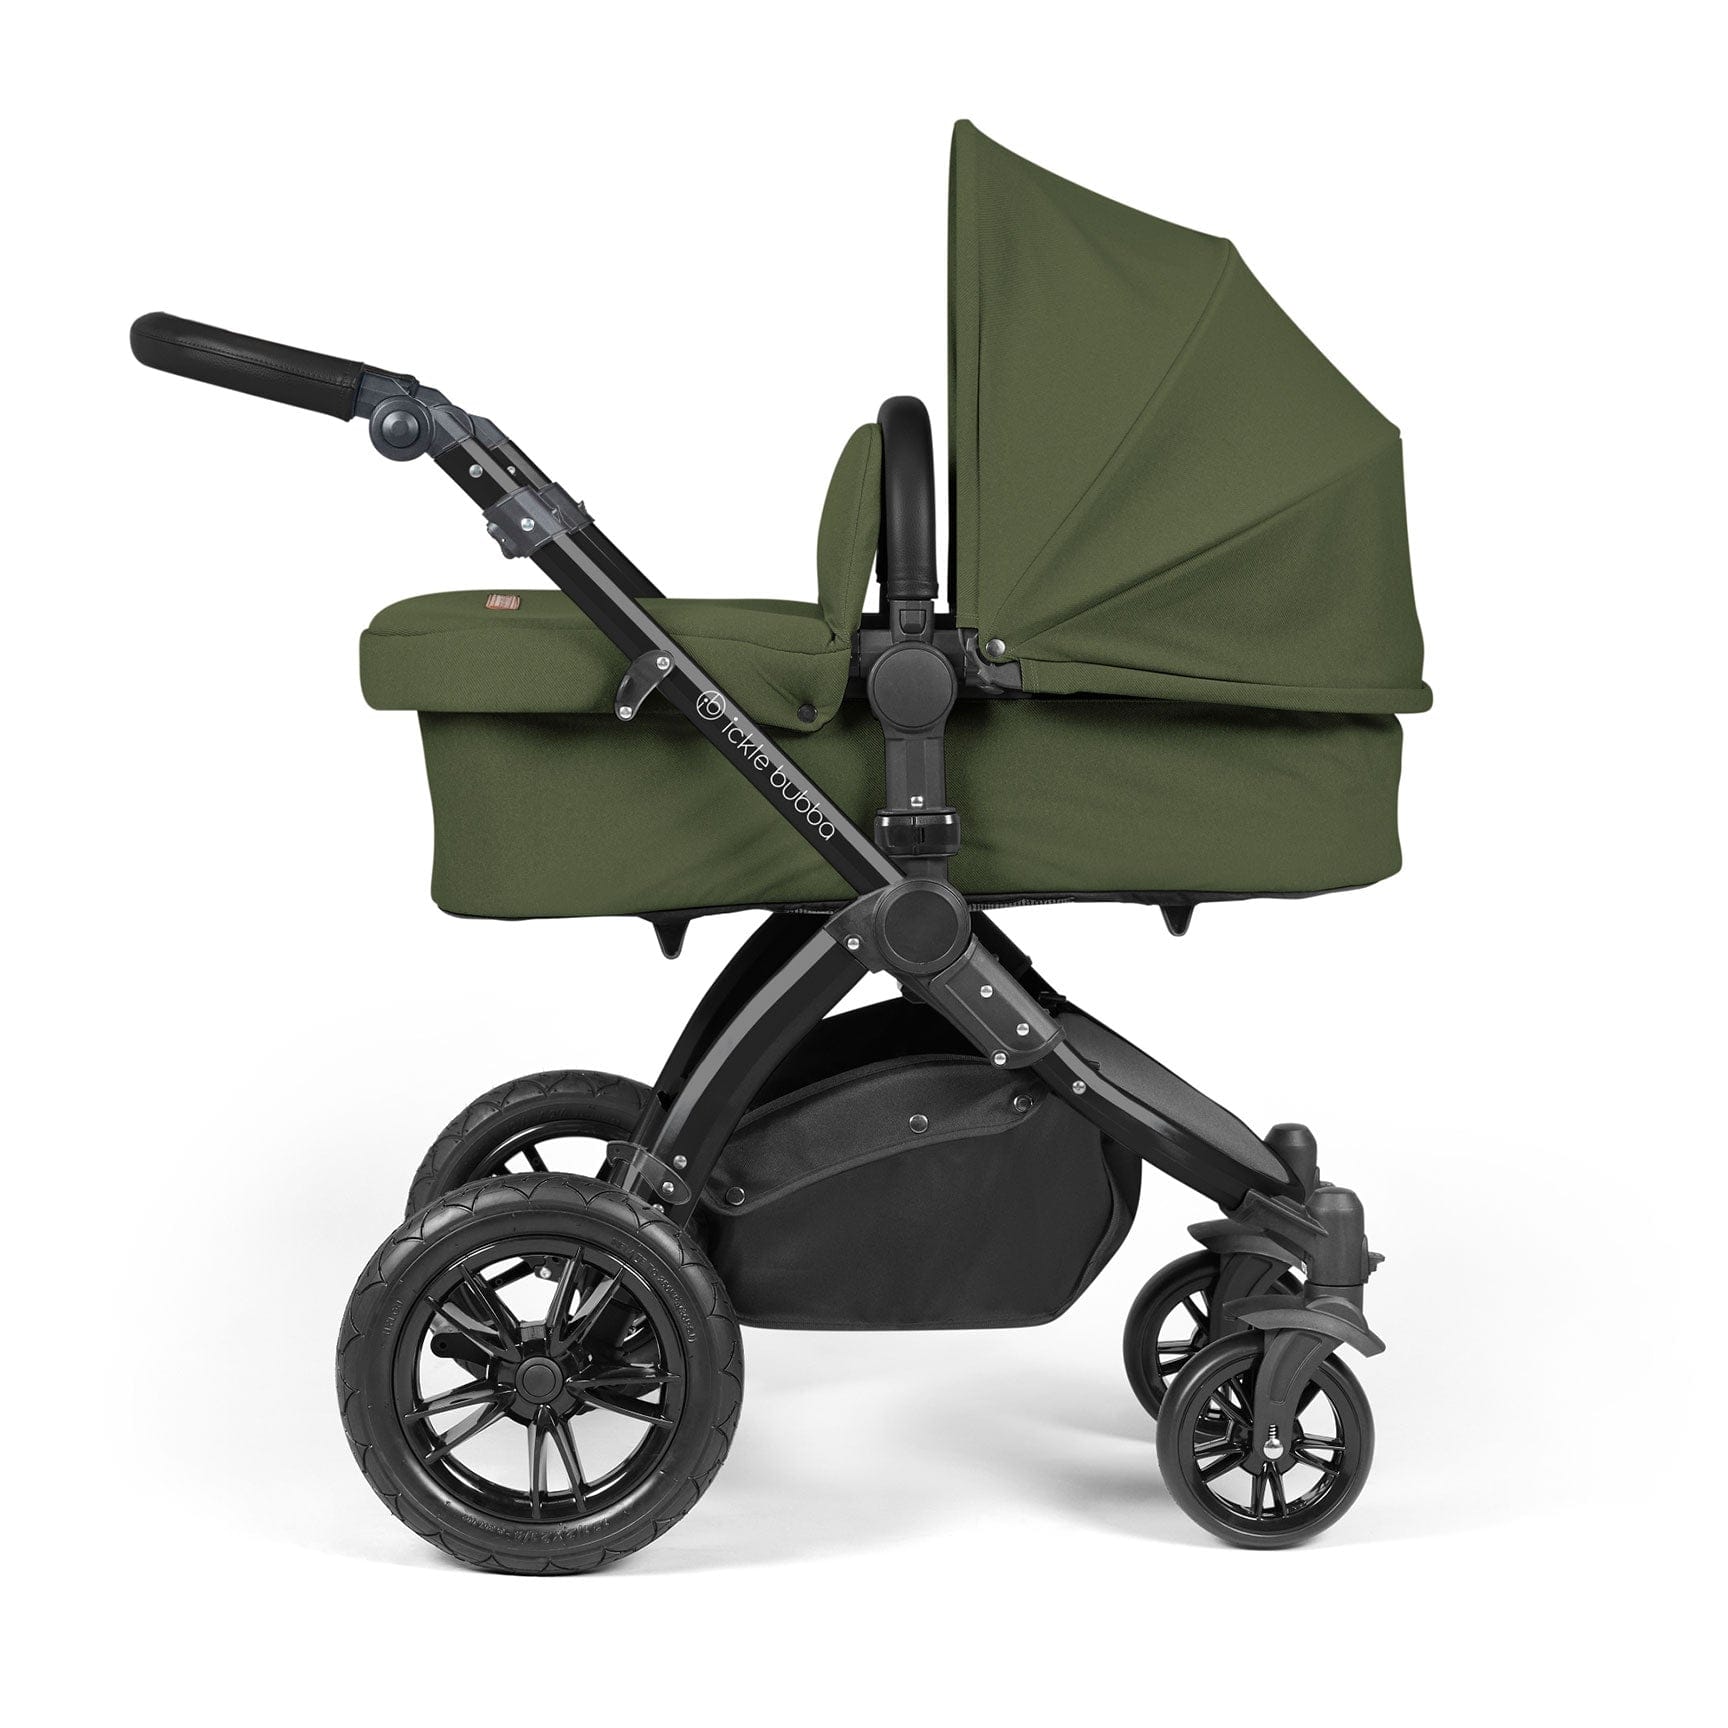 Ickle Bubba travel systems Ickle Bubba Stomp Luxe 2 in 1 Plus Pushchair & Carrycot - Black/Woodland/Black 10-003-001-138